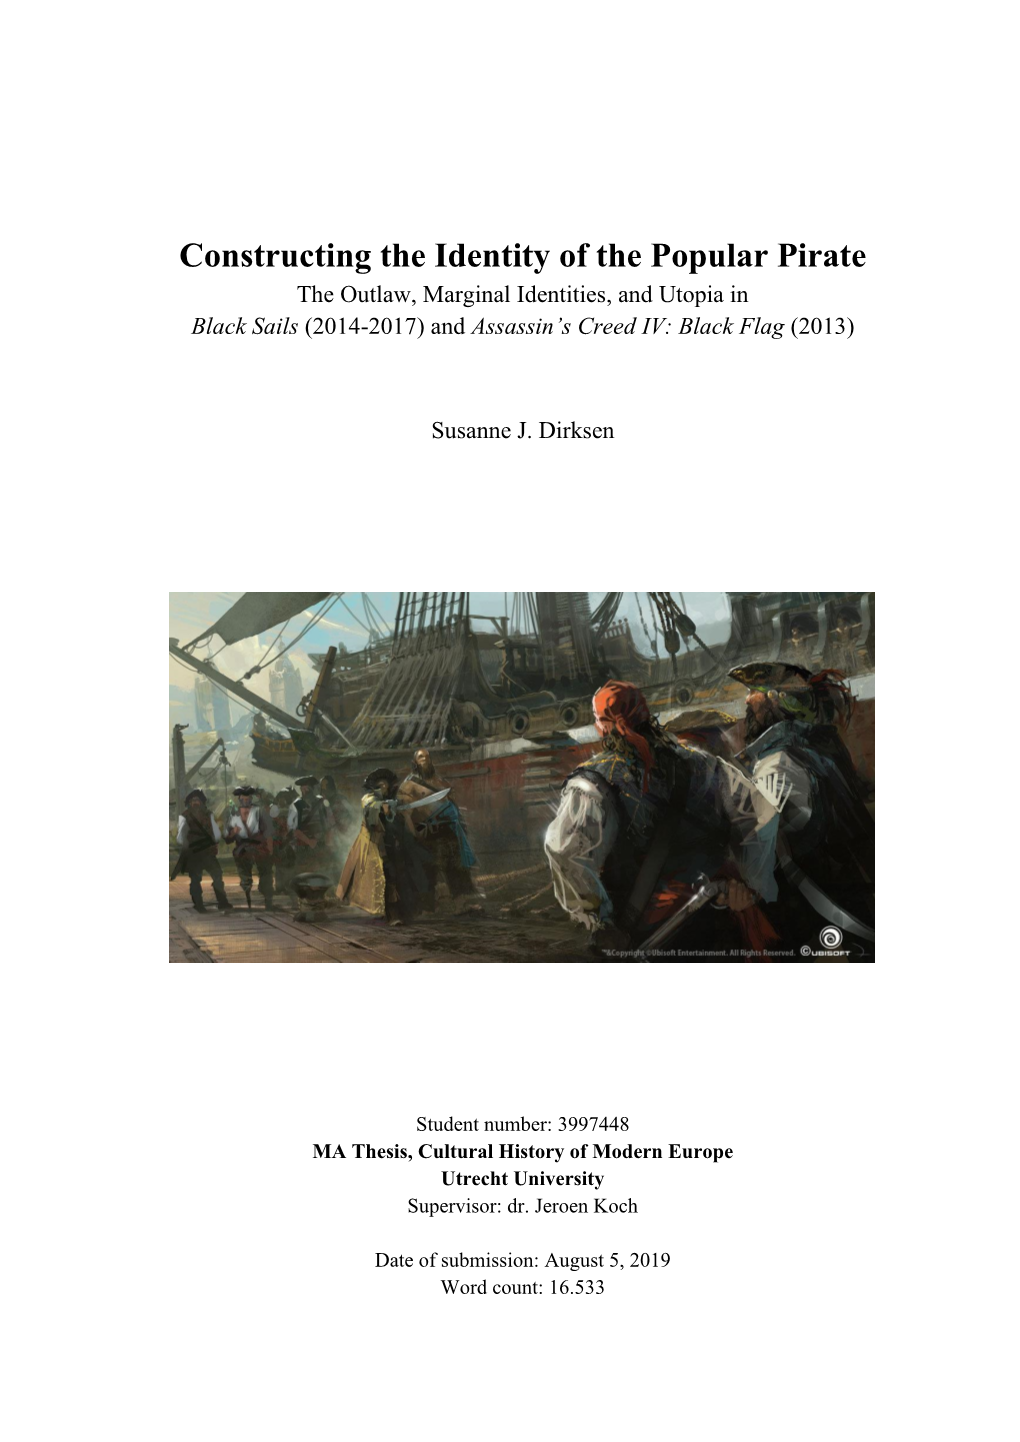 Constructing the Identity of the Popular Pirate the Outlaw, Marginal Identities, and Utopia in Black Sails (2014-2017) and Assassin’S Creed IV: Black Flag (2013)